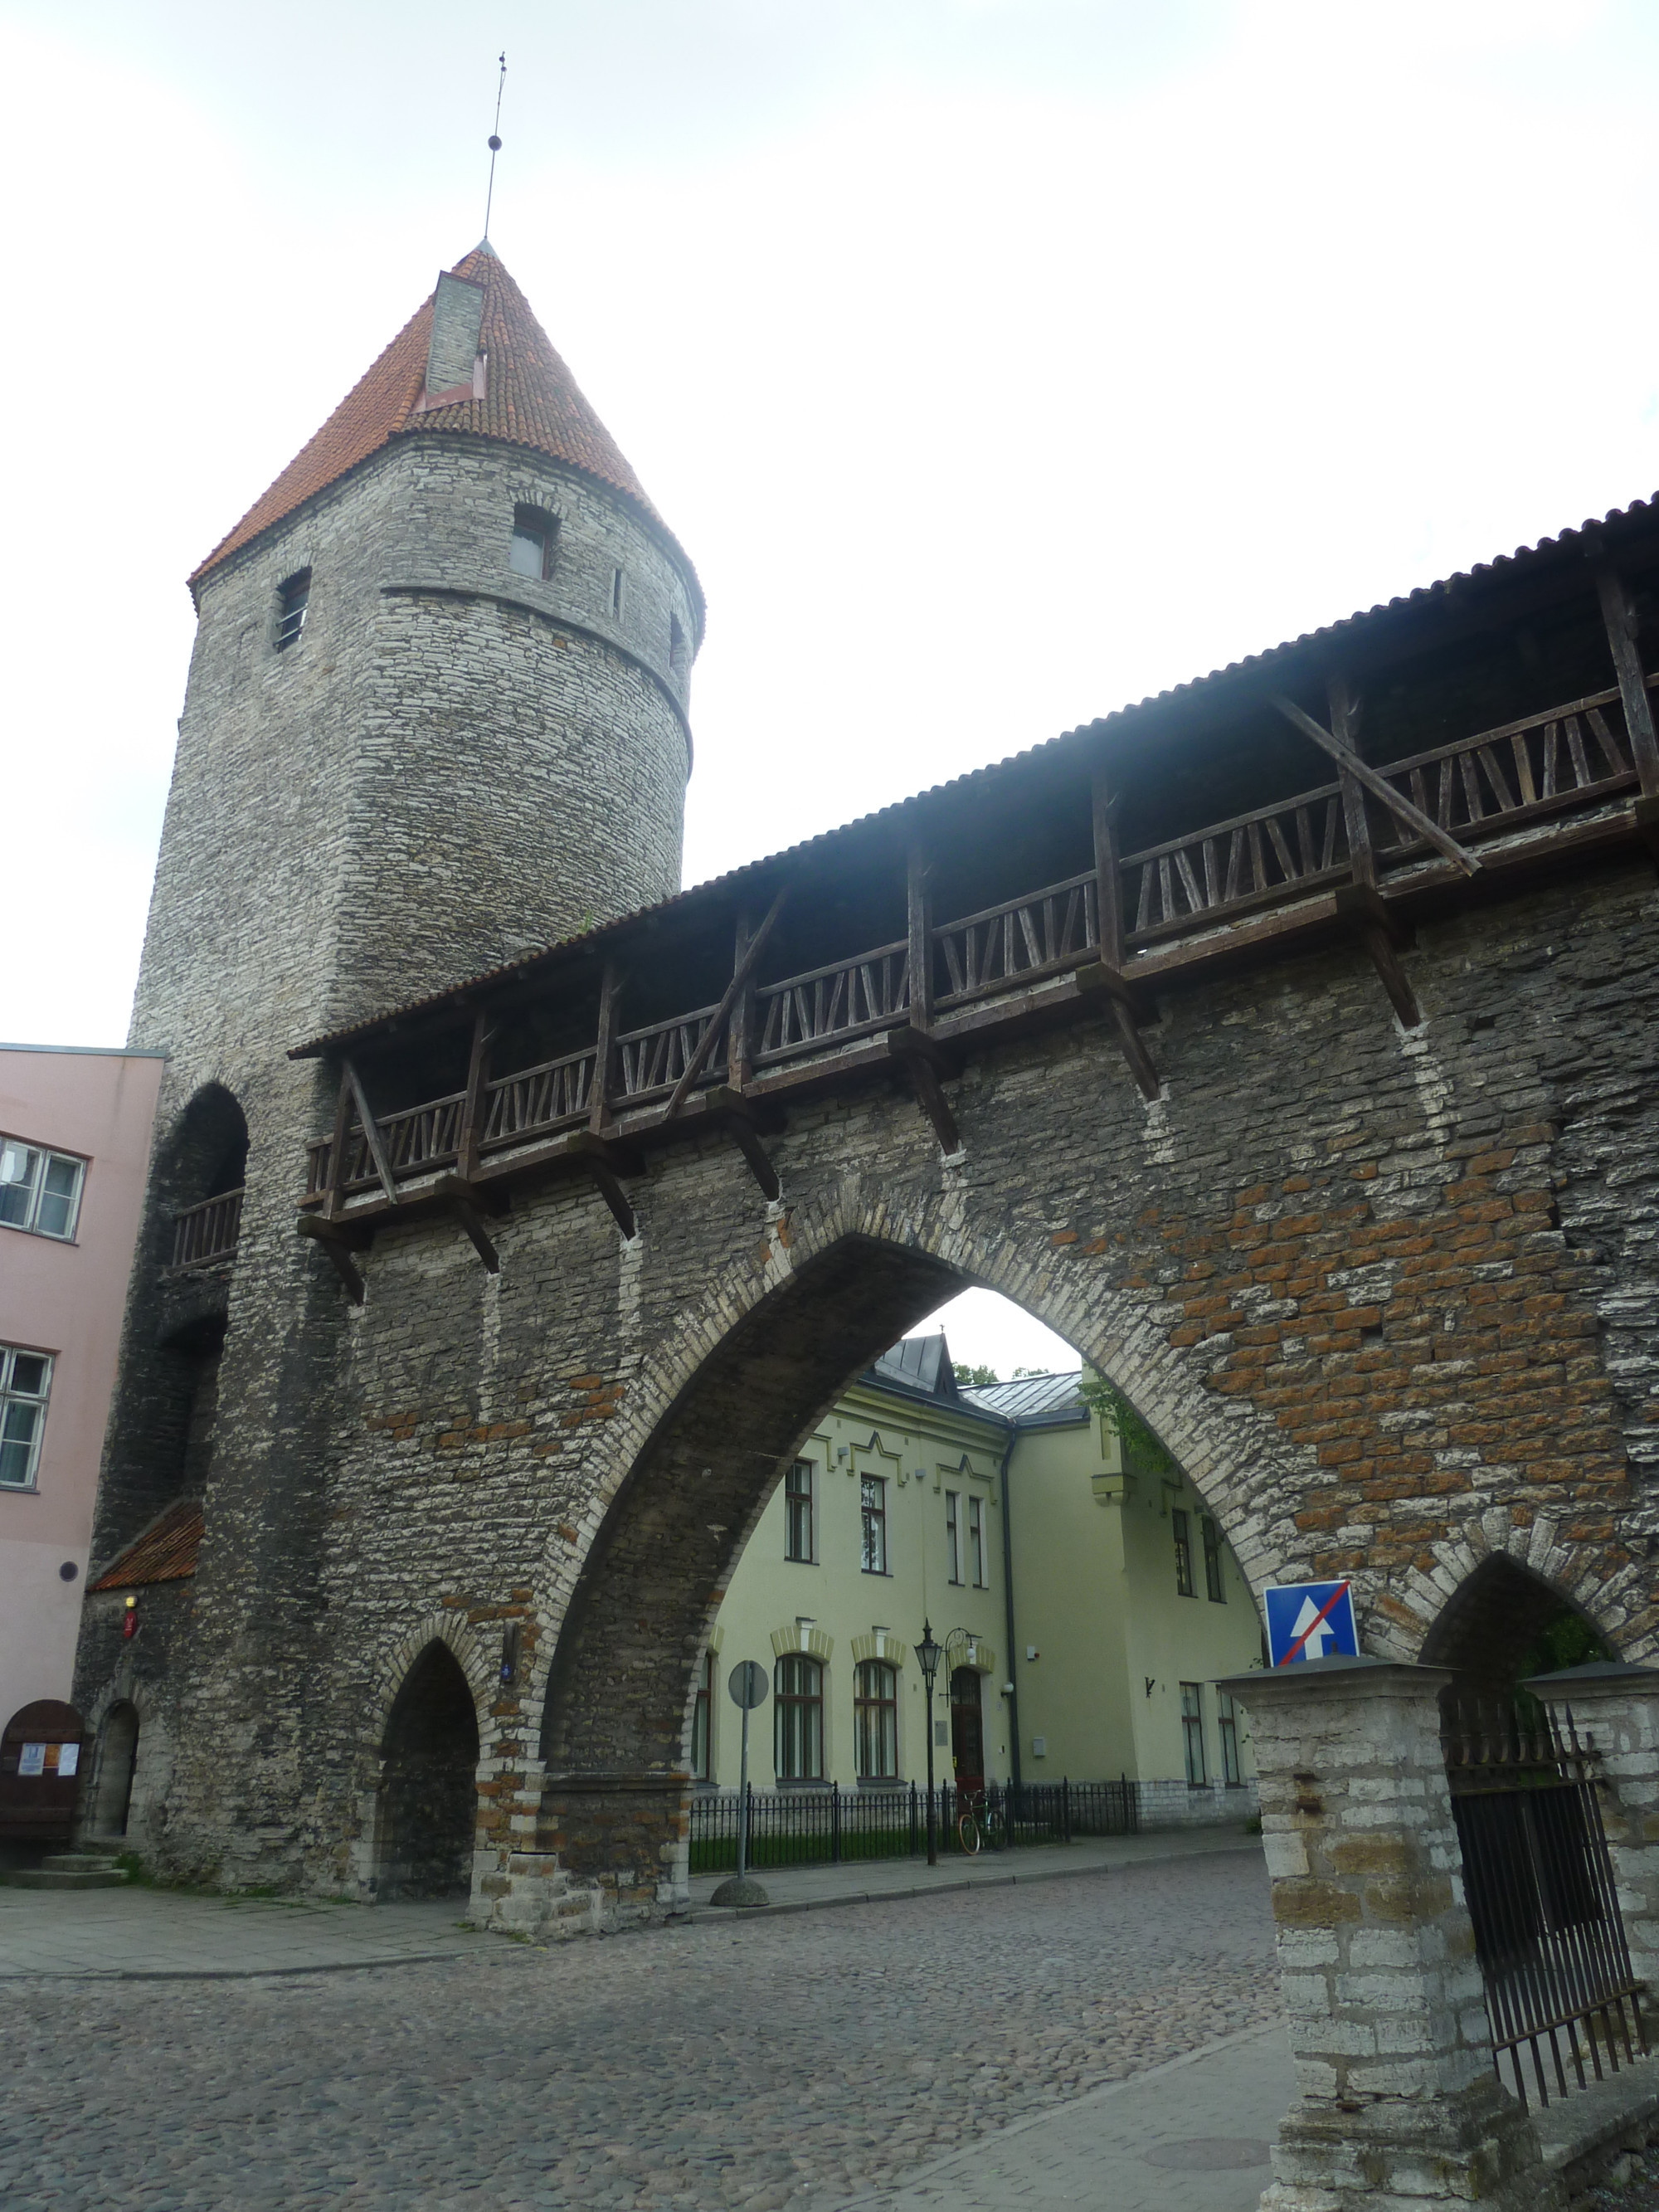 The Nun's Tower and Monastery Gate